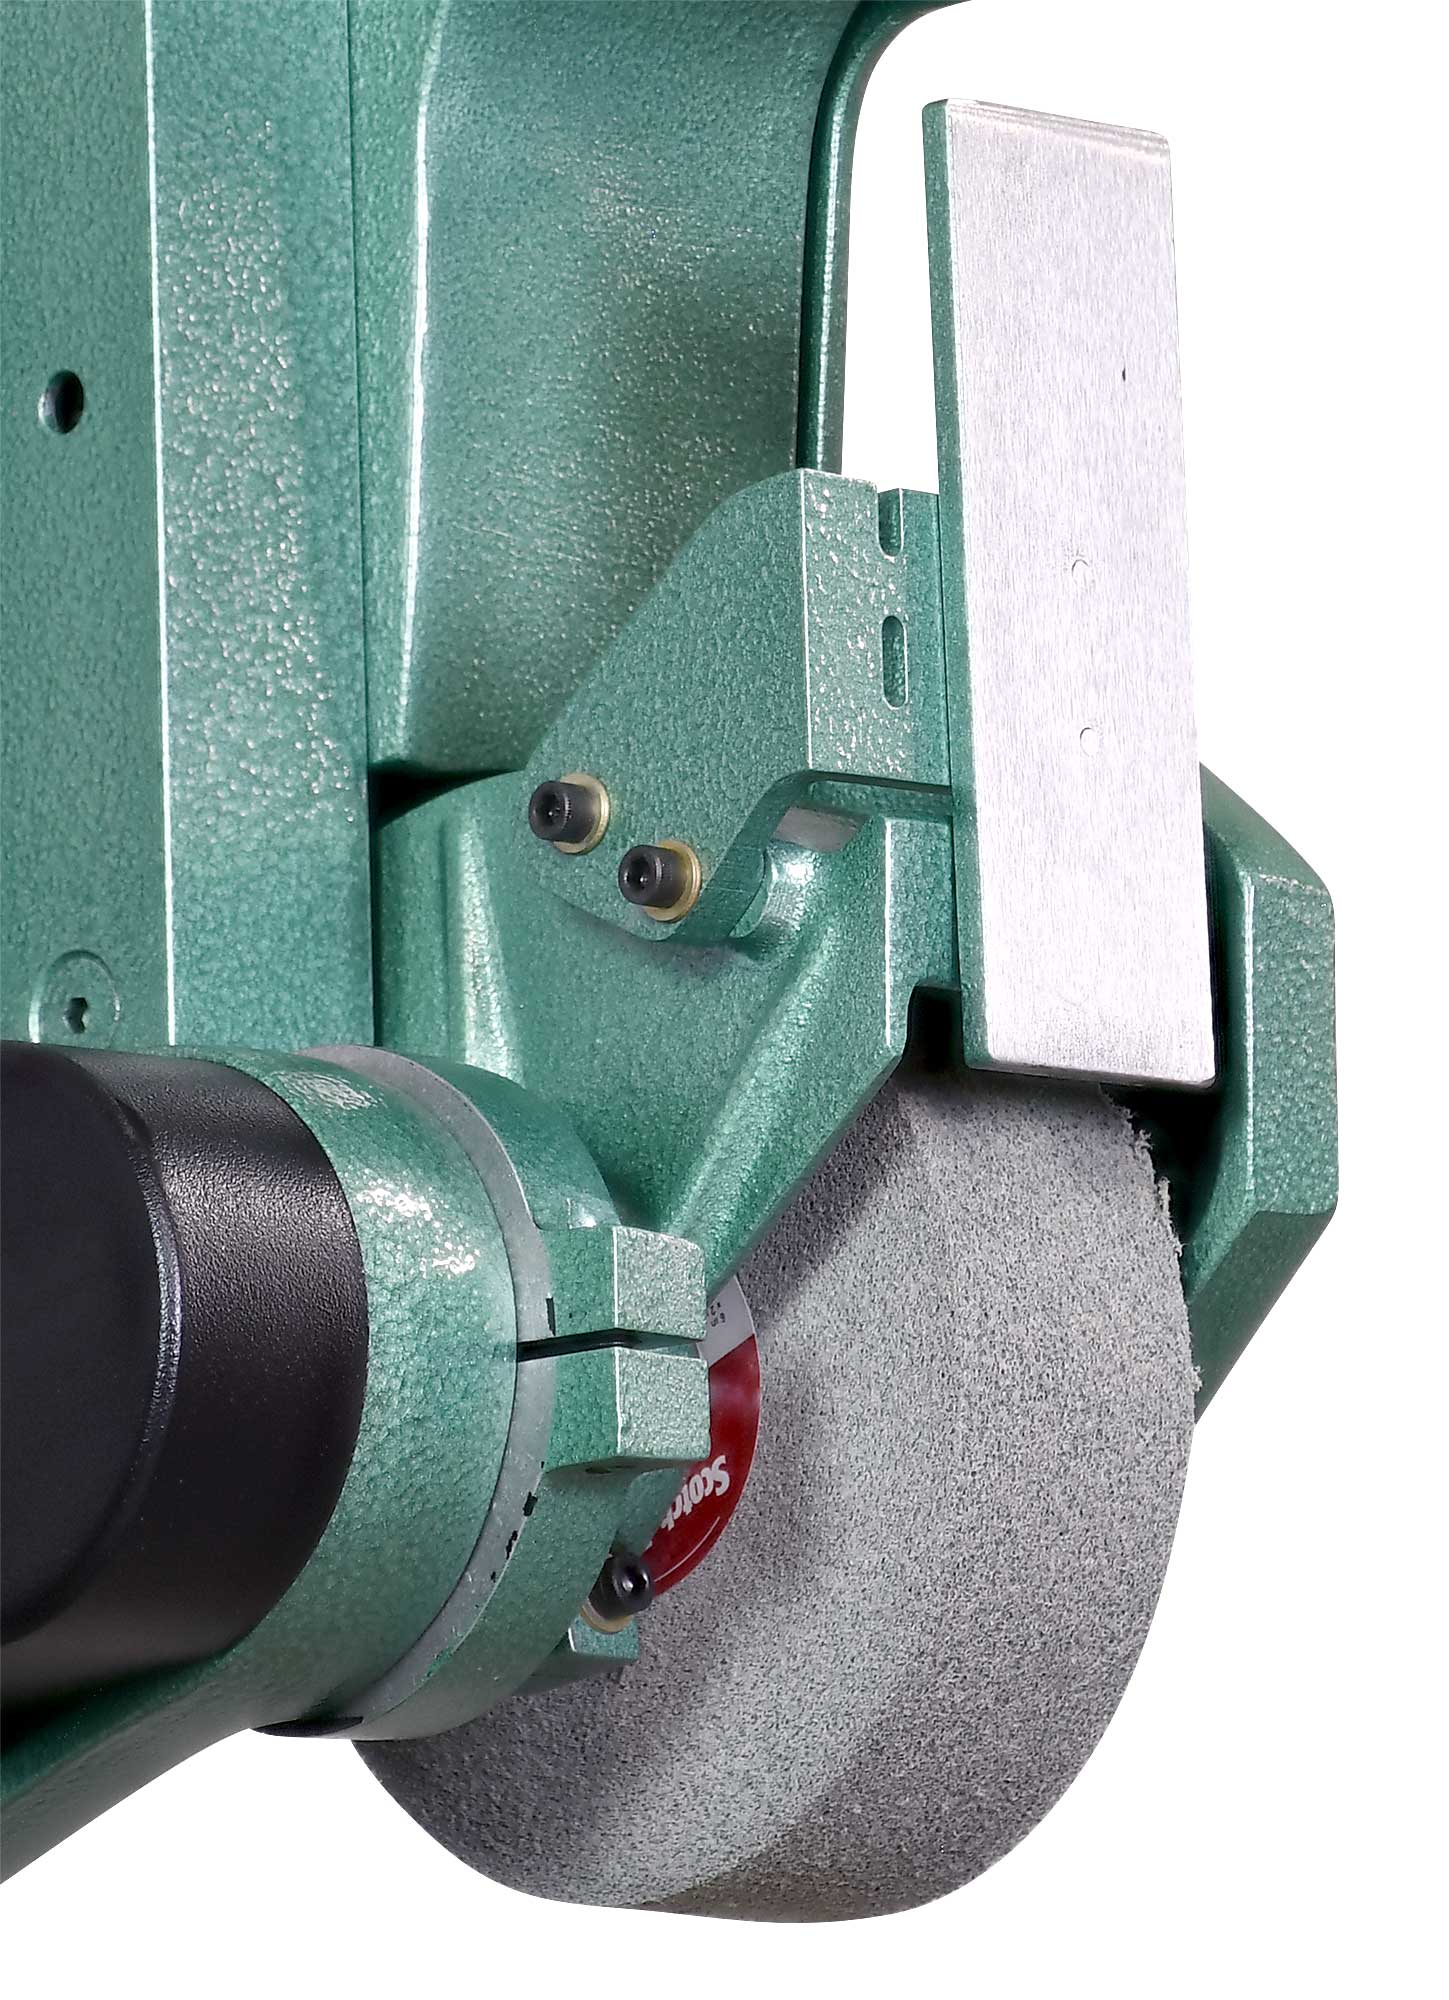 24821 - X400 variable speed belt grinder.  Did you know you can remove the contact wheel and use a wheel adapter to run wheels like Scotchbrite® or even a buffing wheel.